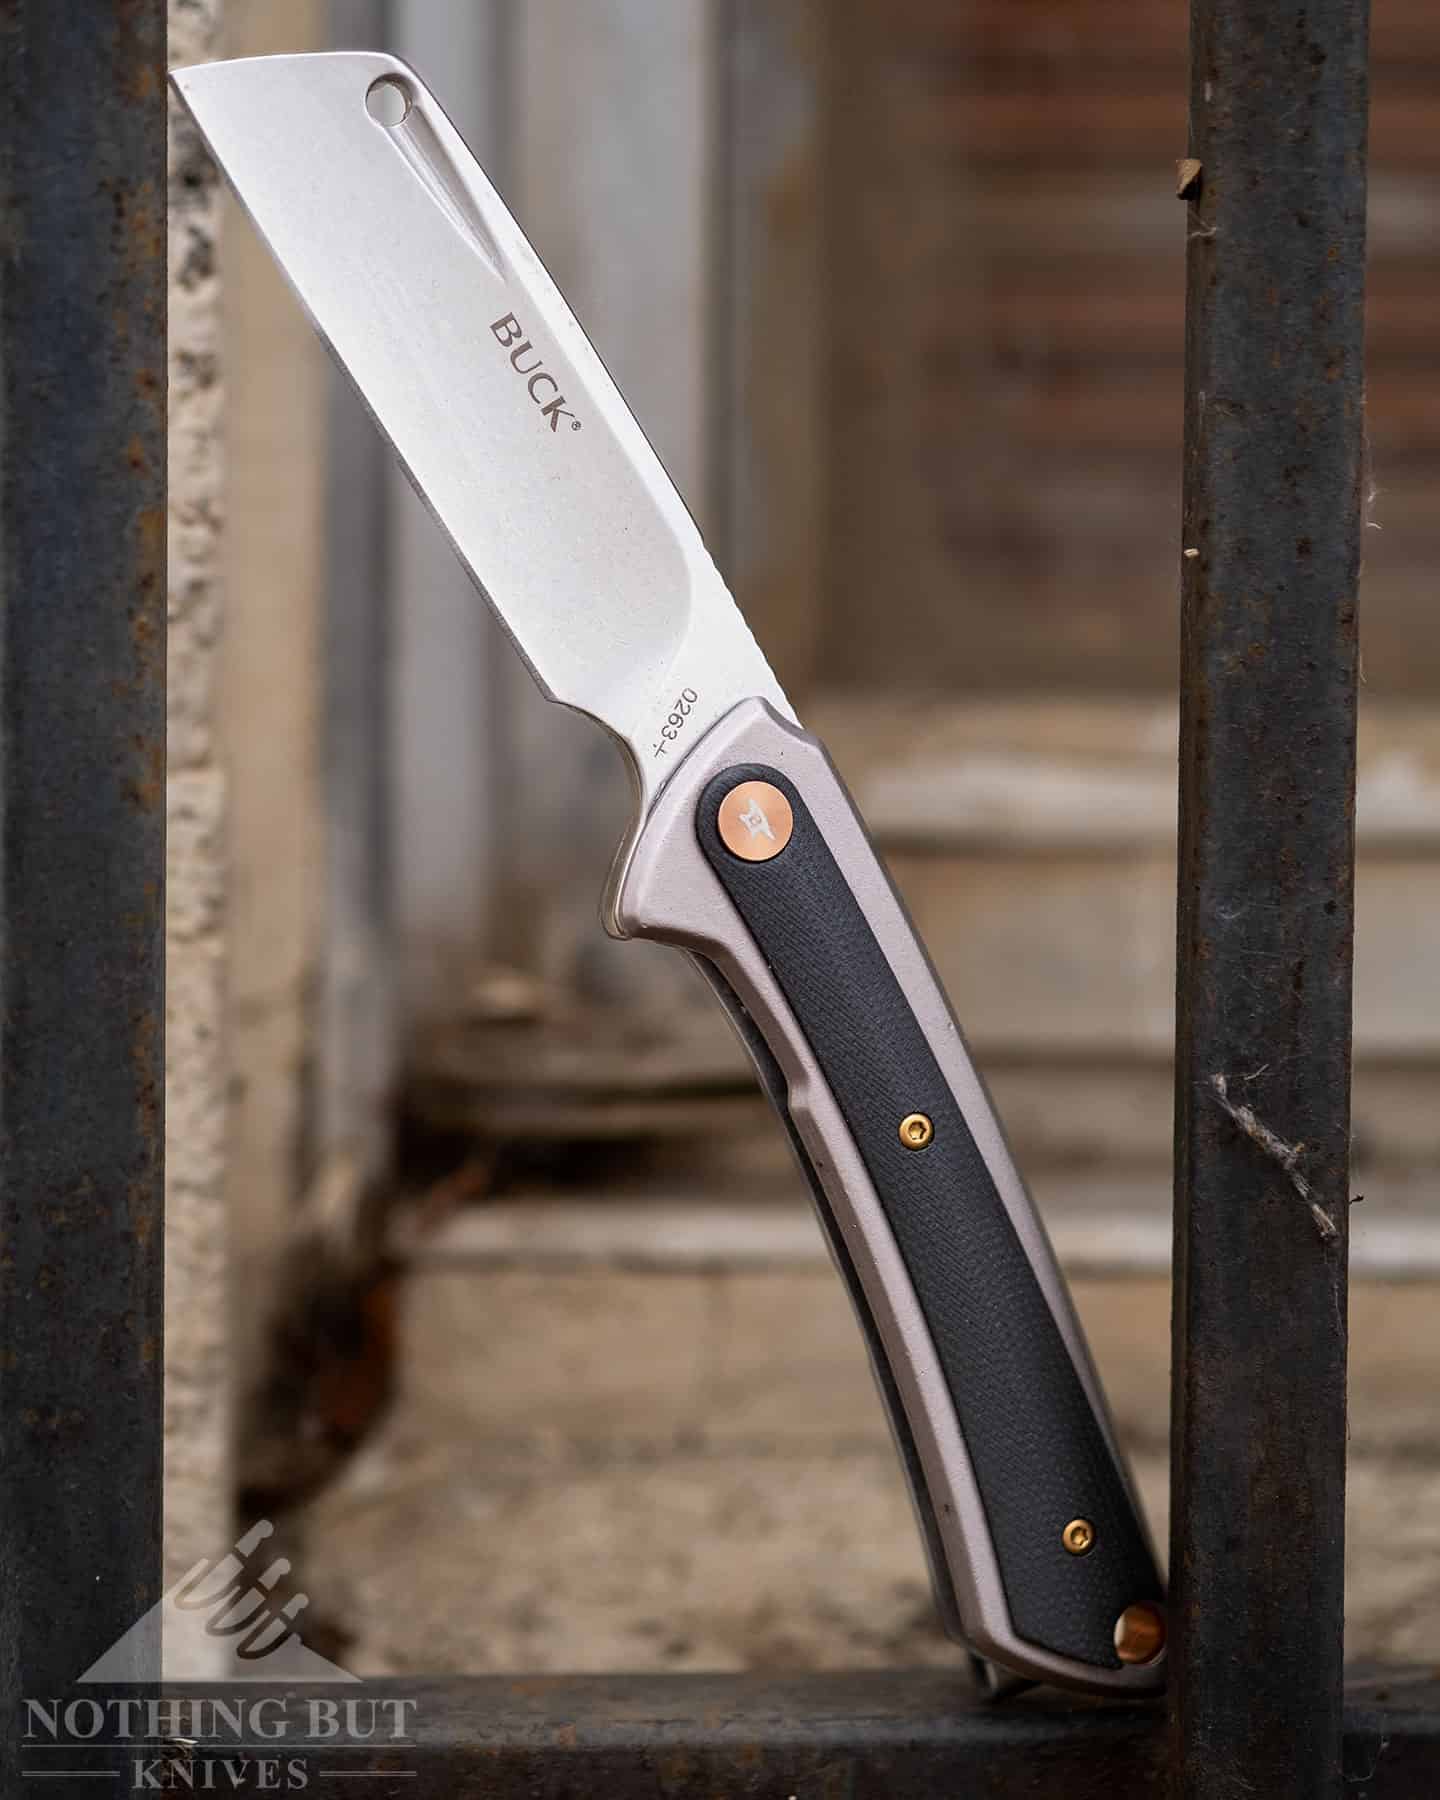 The Buck HiLine is a busget folder that features a good design and good fit and finish.